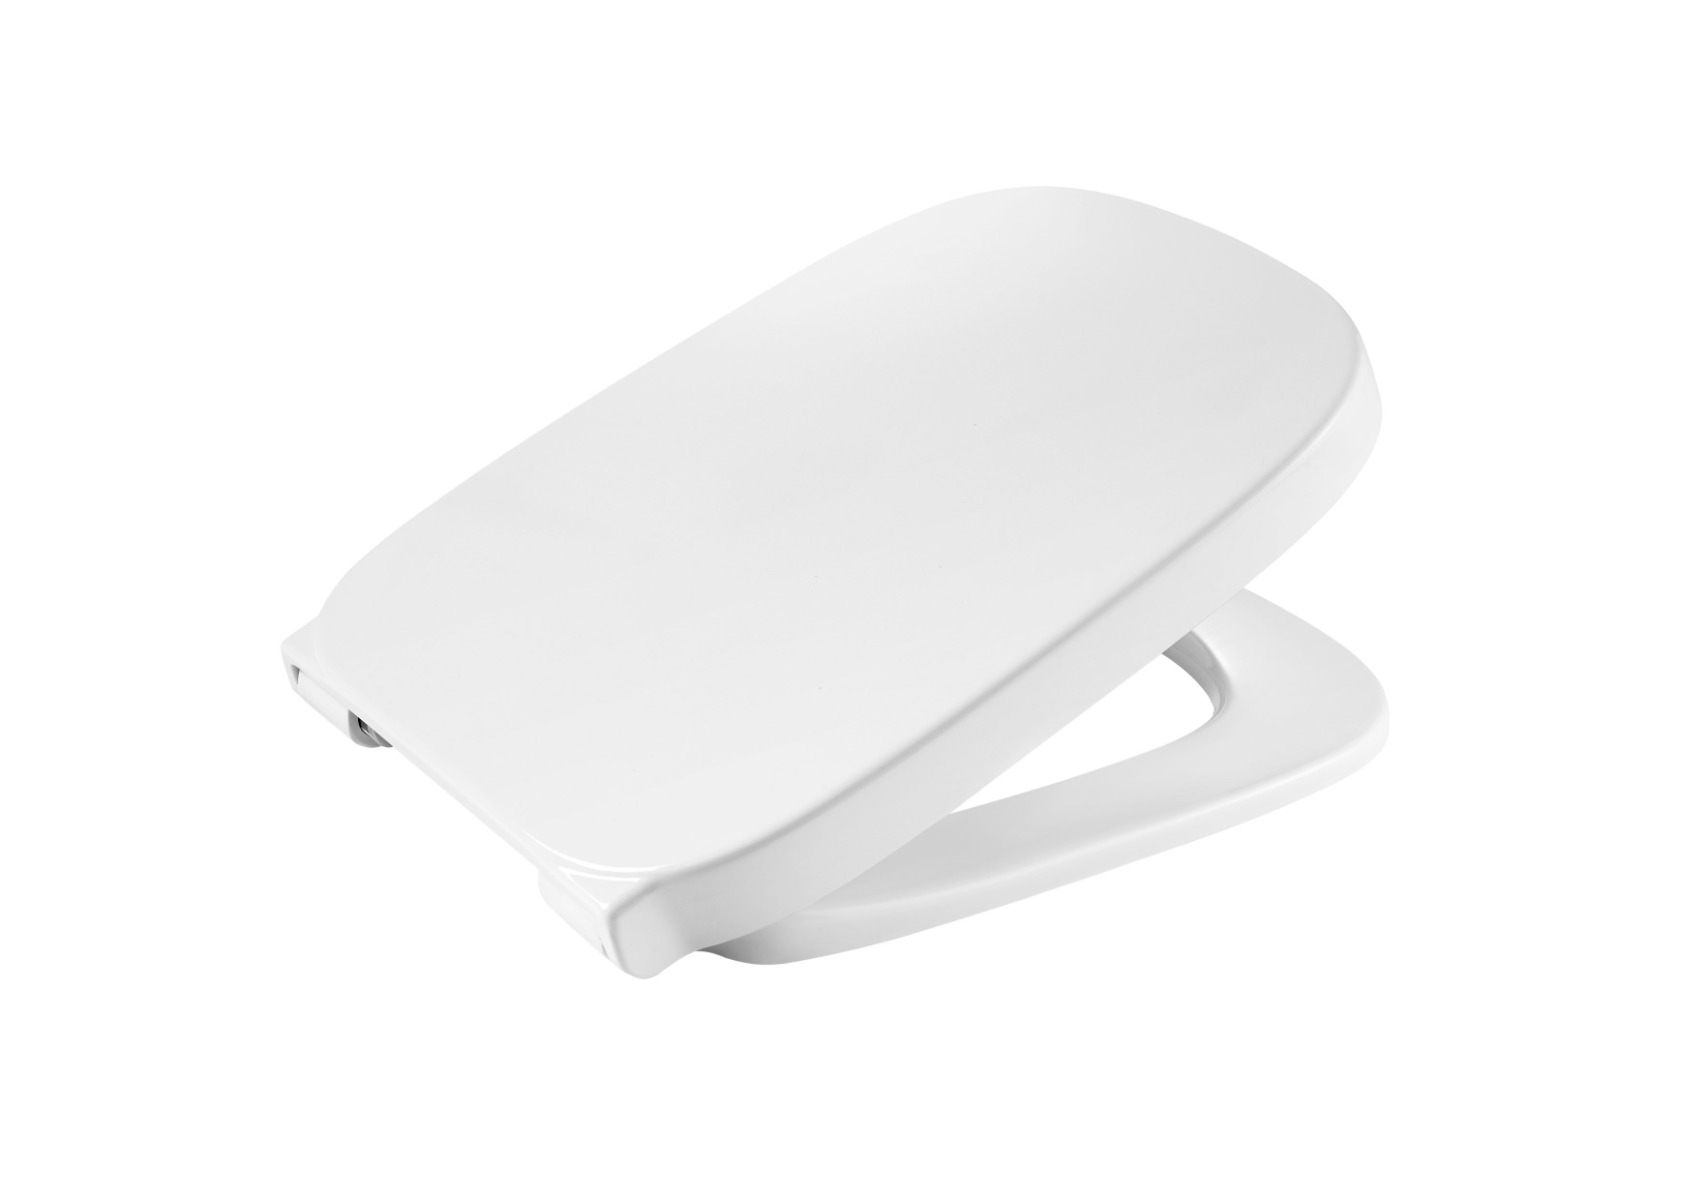 Toilet seat and cover Z8019B000U